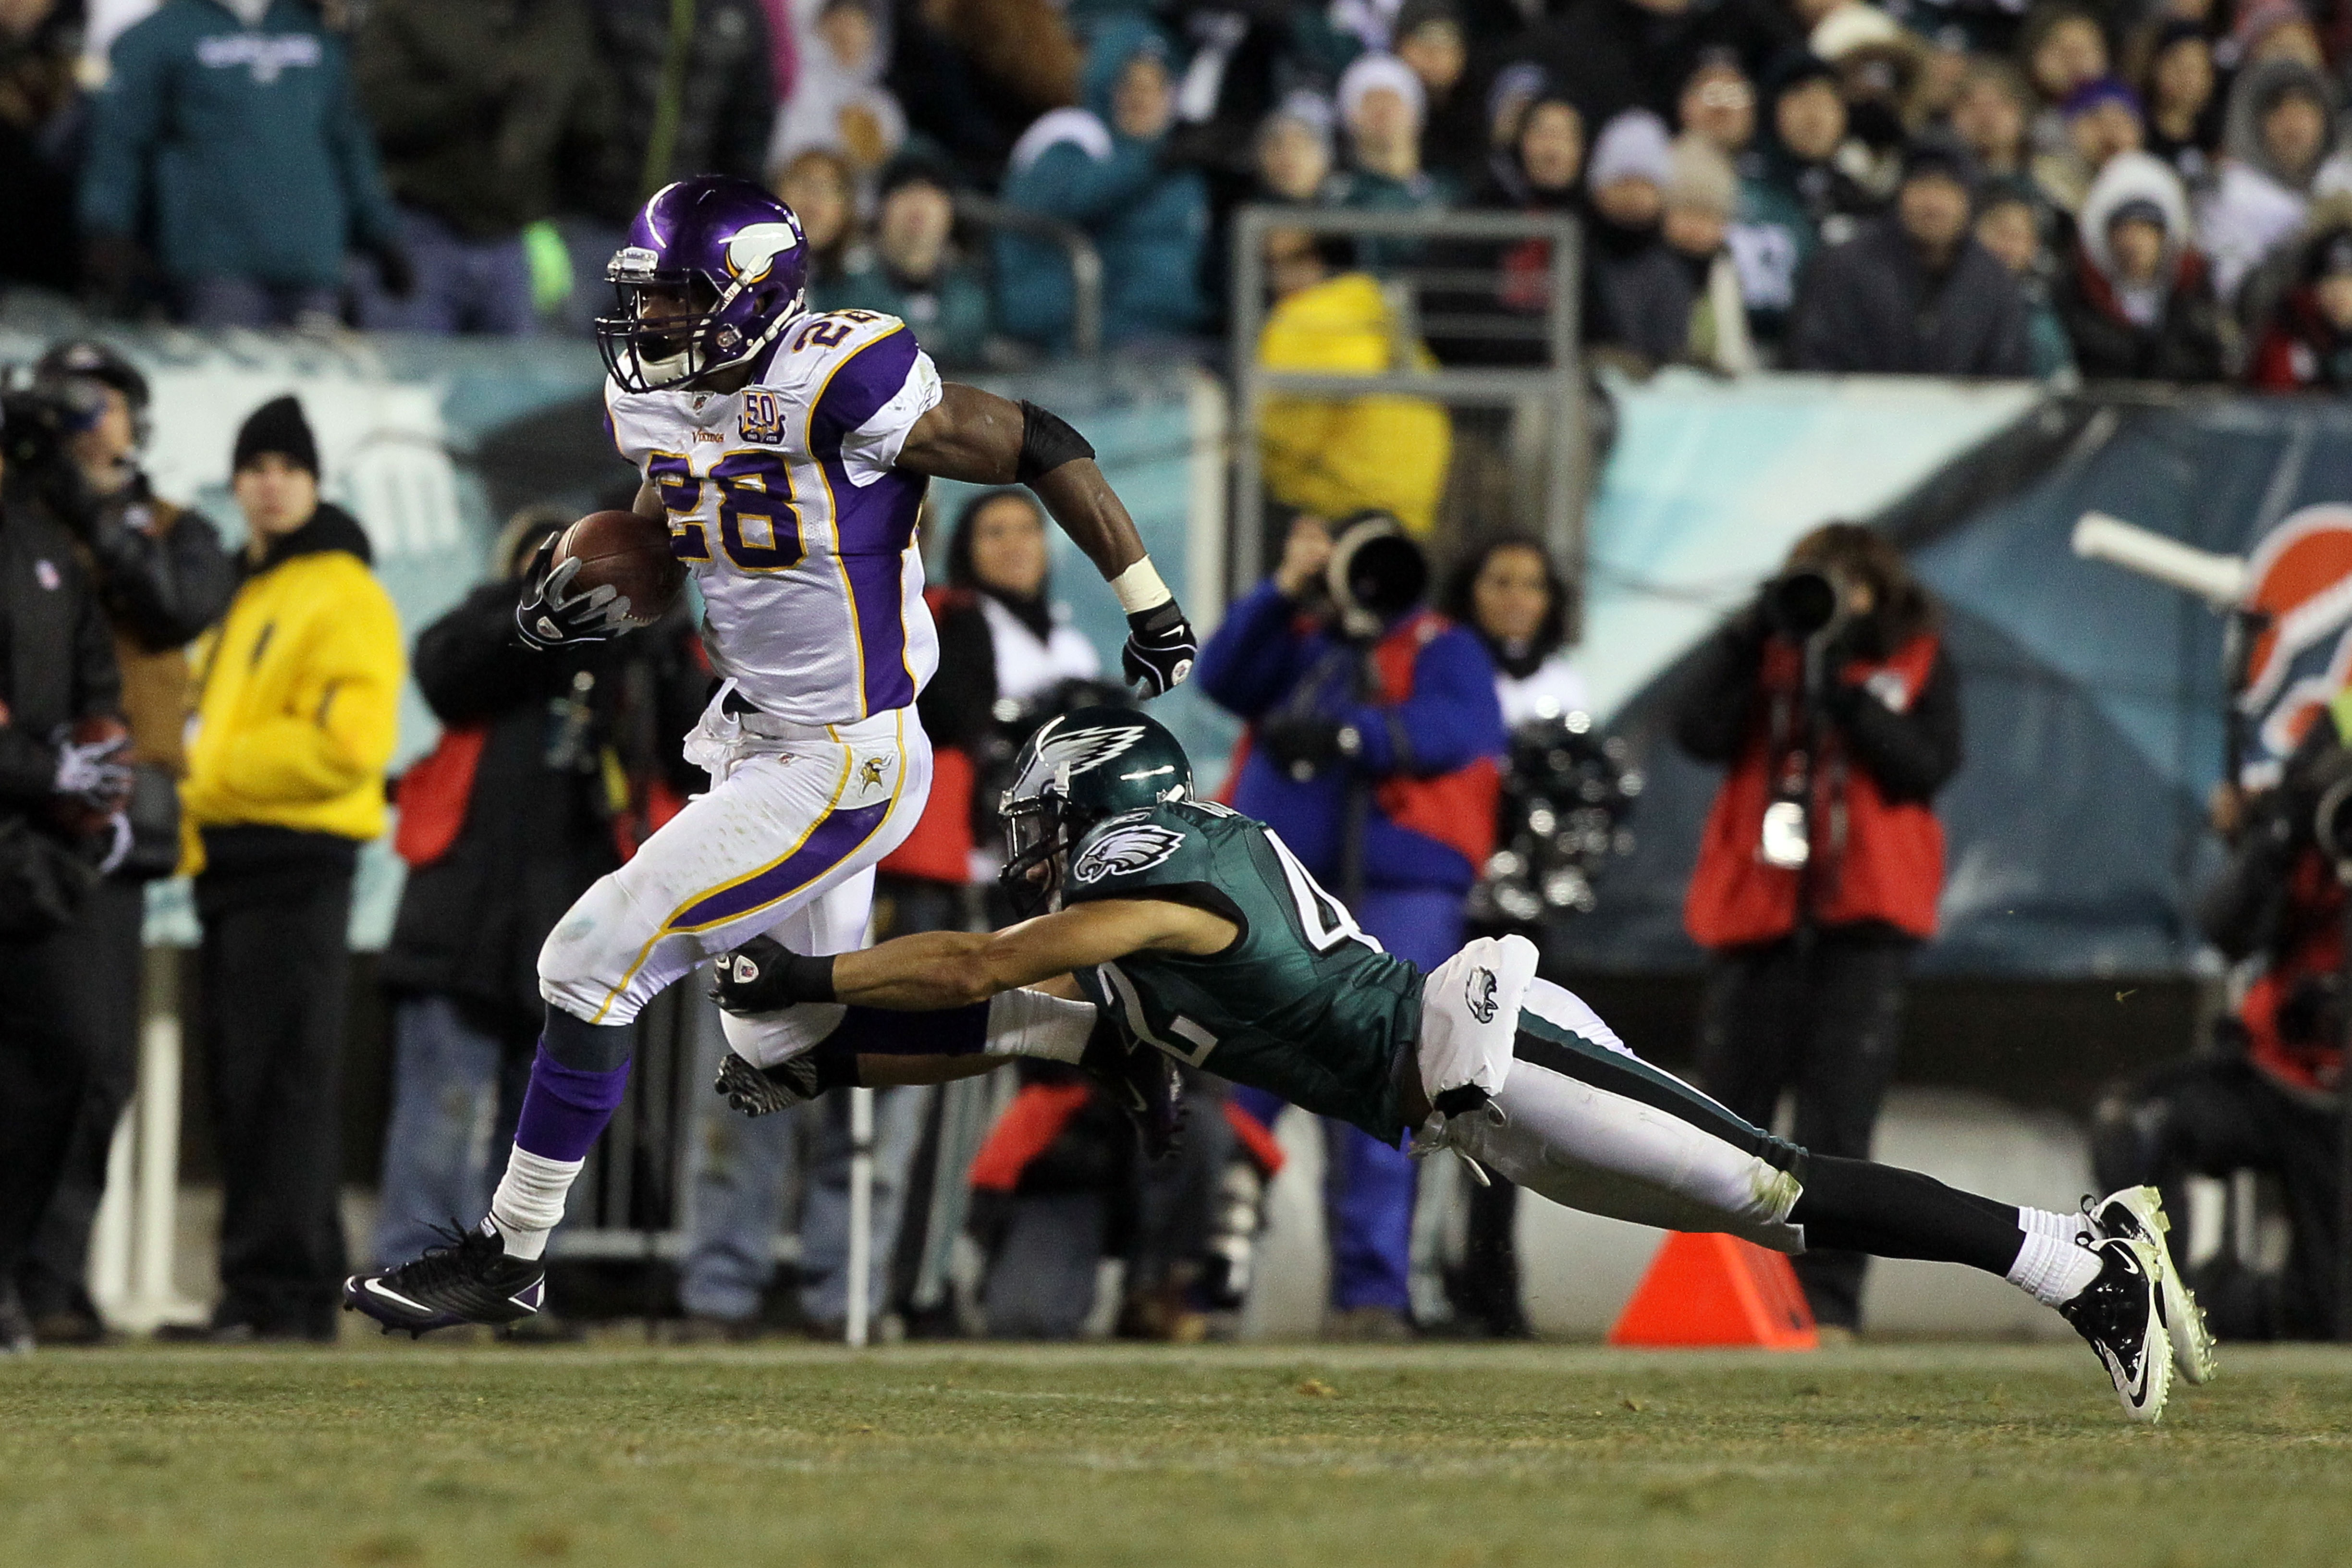 Eagles-Vikings: How to watch 'Thursday Night Football' on